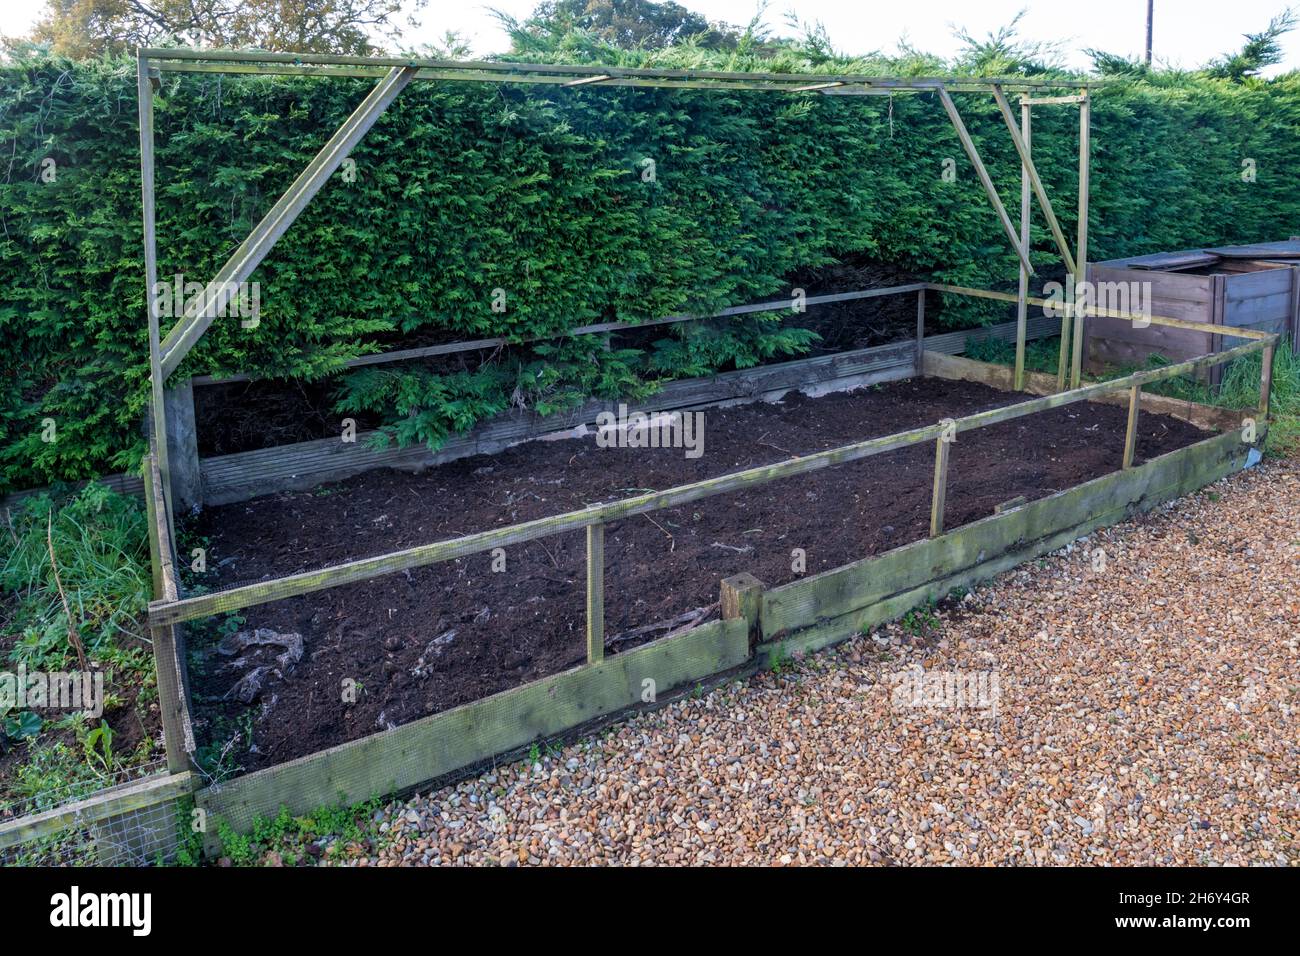 No dig gardening. Vegetable plot covered with cardboard & layer of compost mulch to suppress weeds & improve the soil ready for planting next spring. Stock Photo